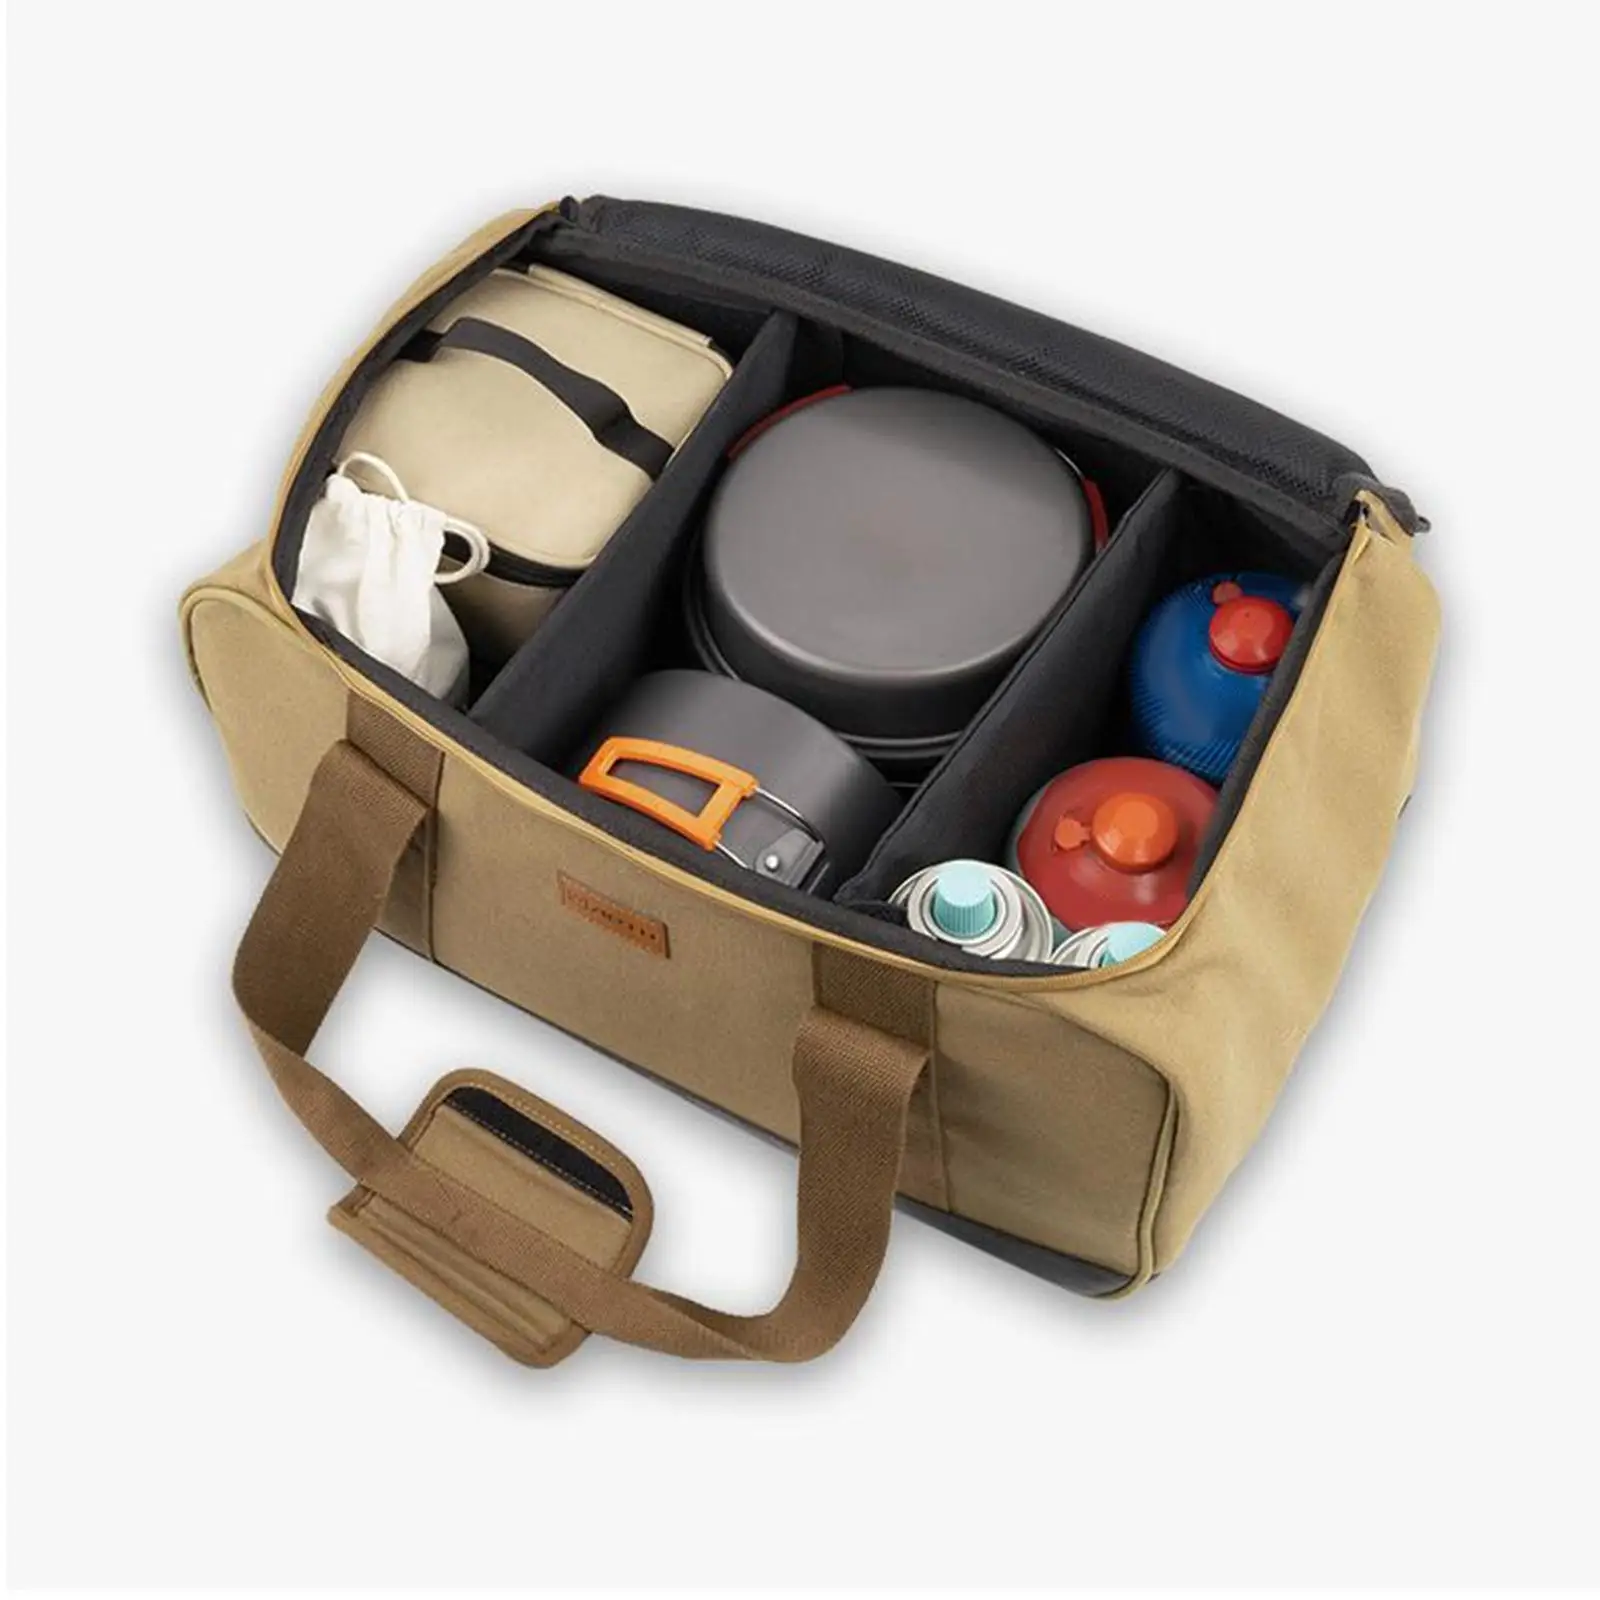 Portable BBQ Tableware Carry Bag Camping Accessories Tool Bag Camping Cooking Utensils Organizer for Outdoor